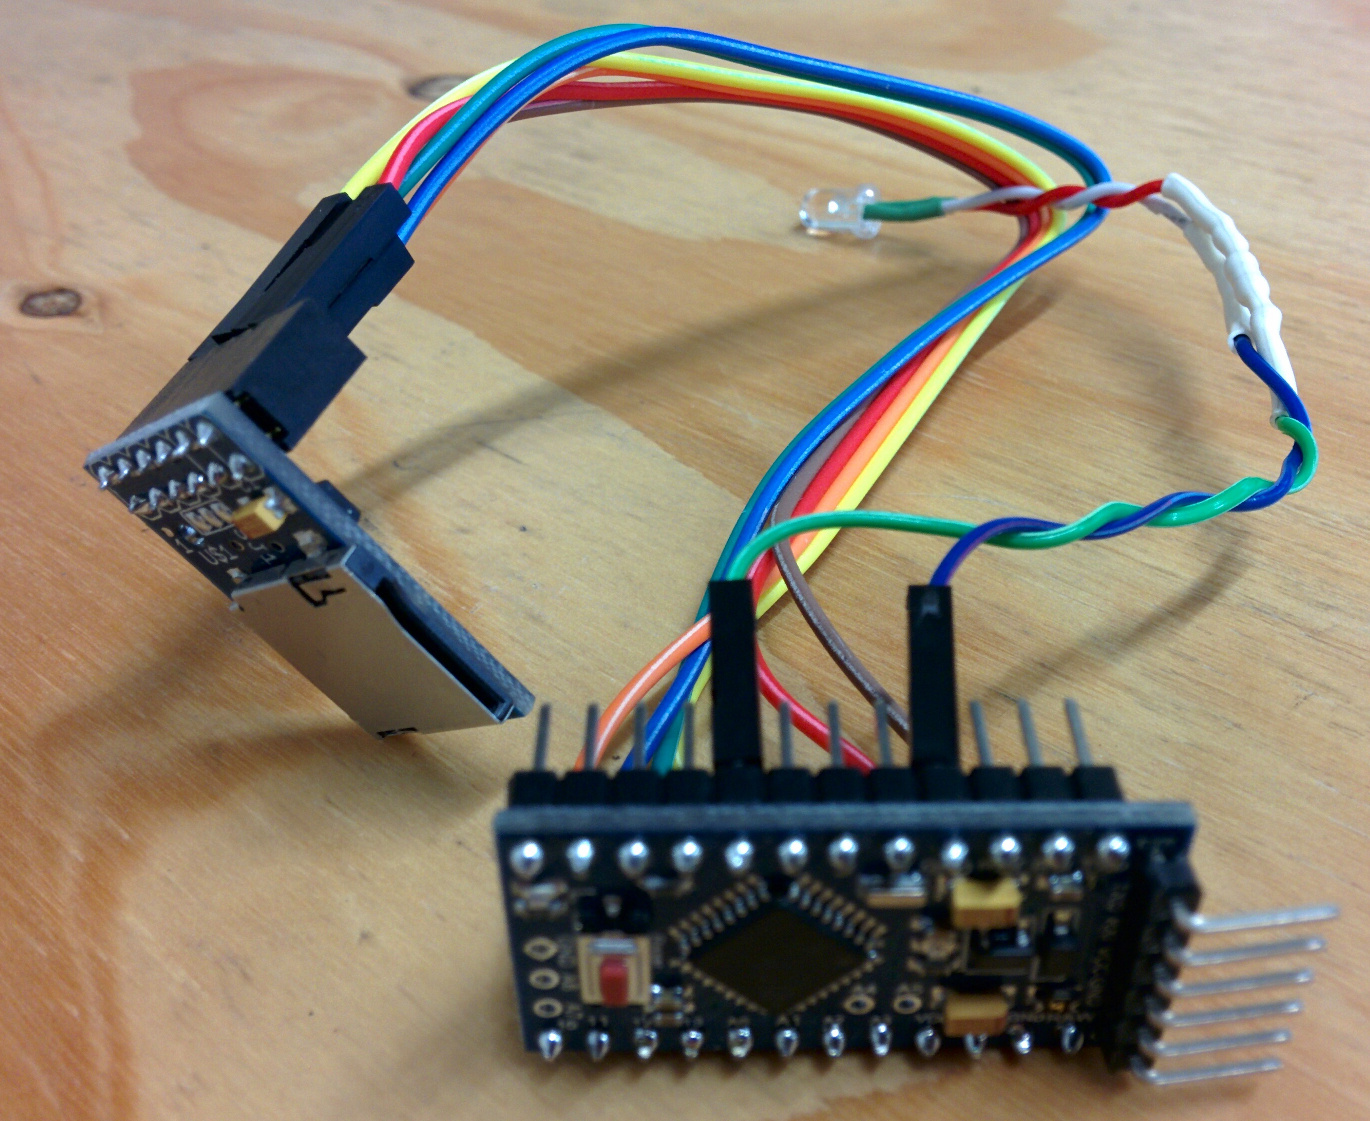 Making an OpenLog Serial Logger from Spare Parts